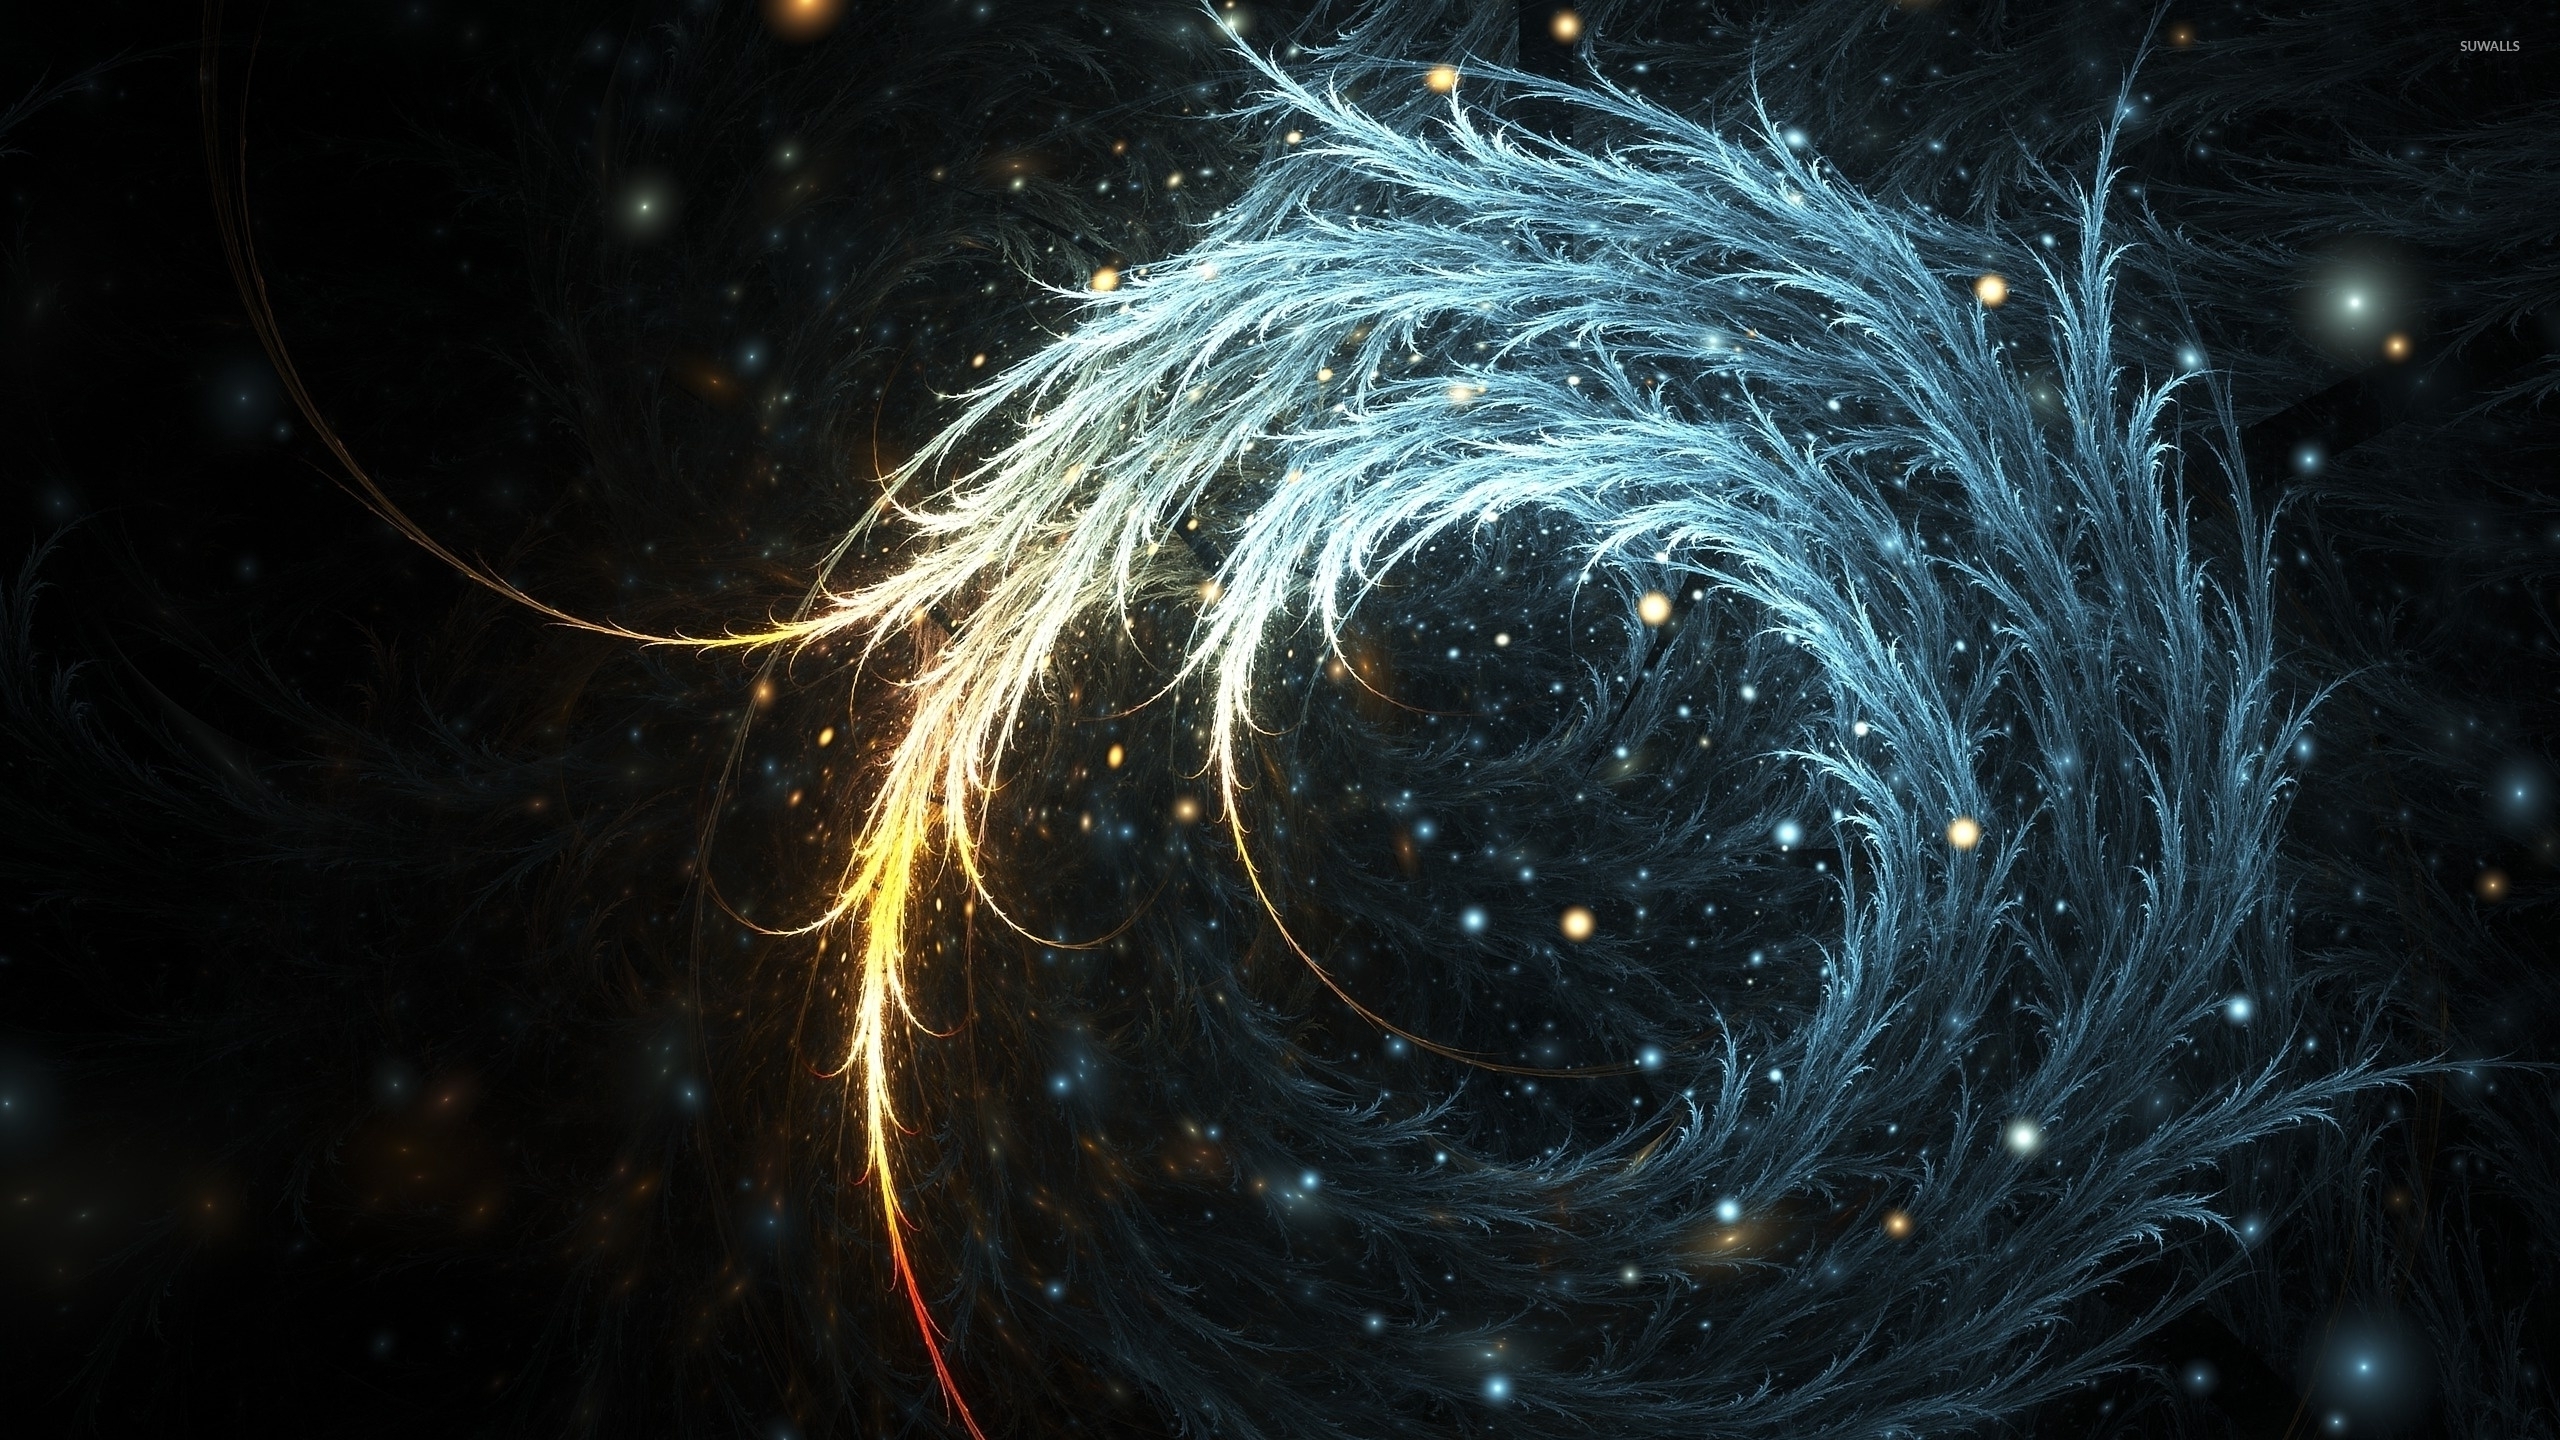 Bright swirl between bright sparks wallpaper   Abstract wallpapers 2560x1440